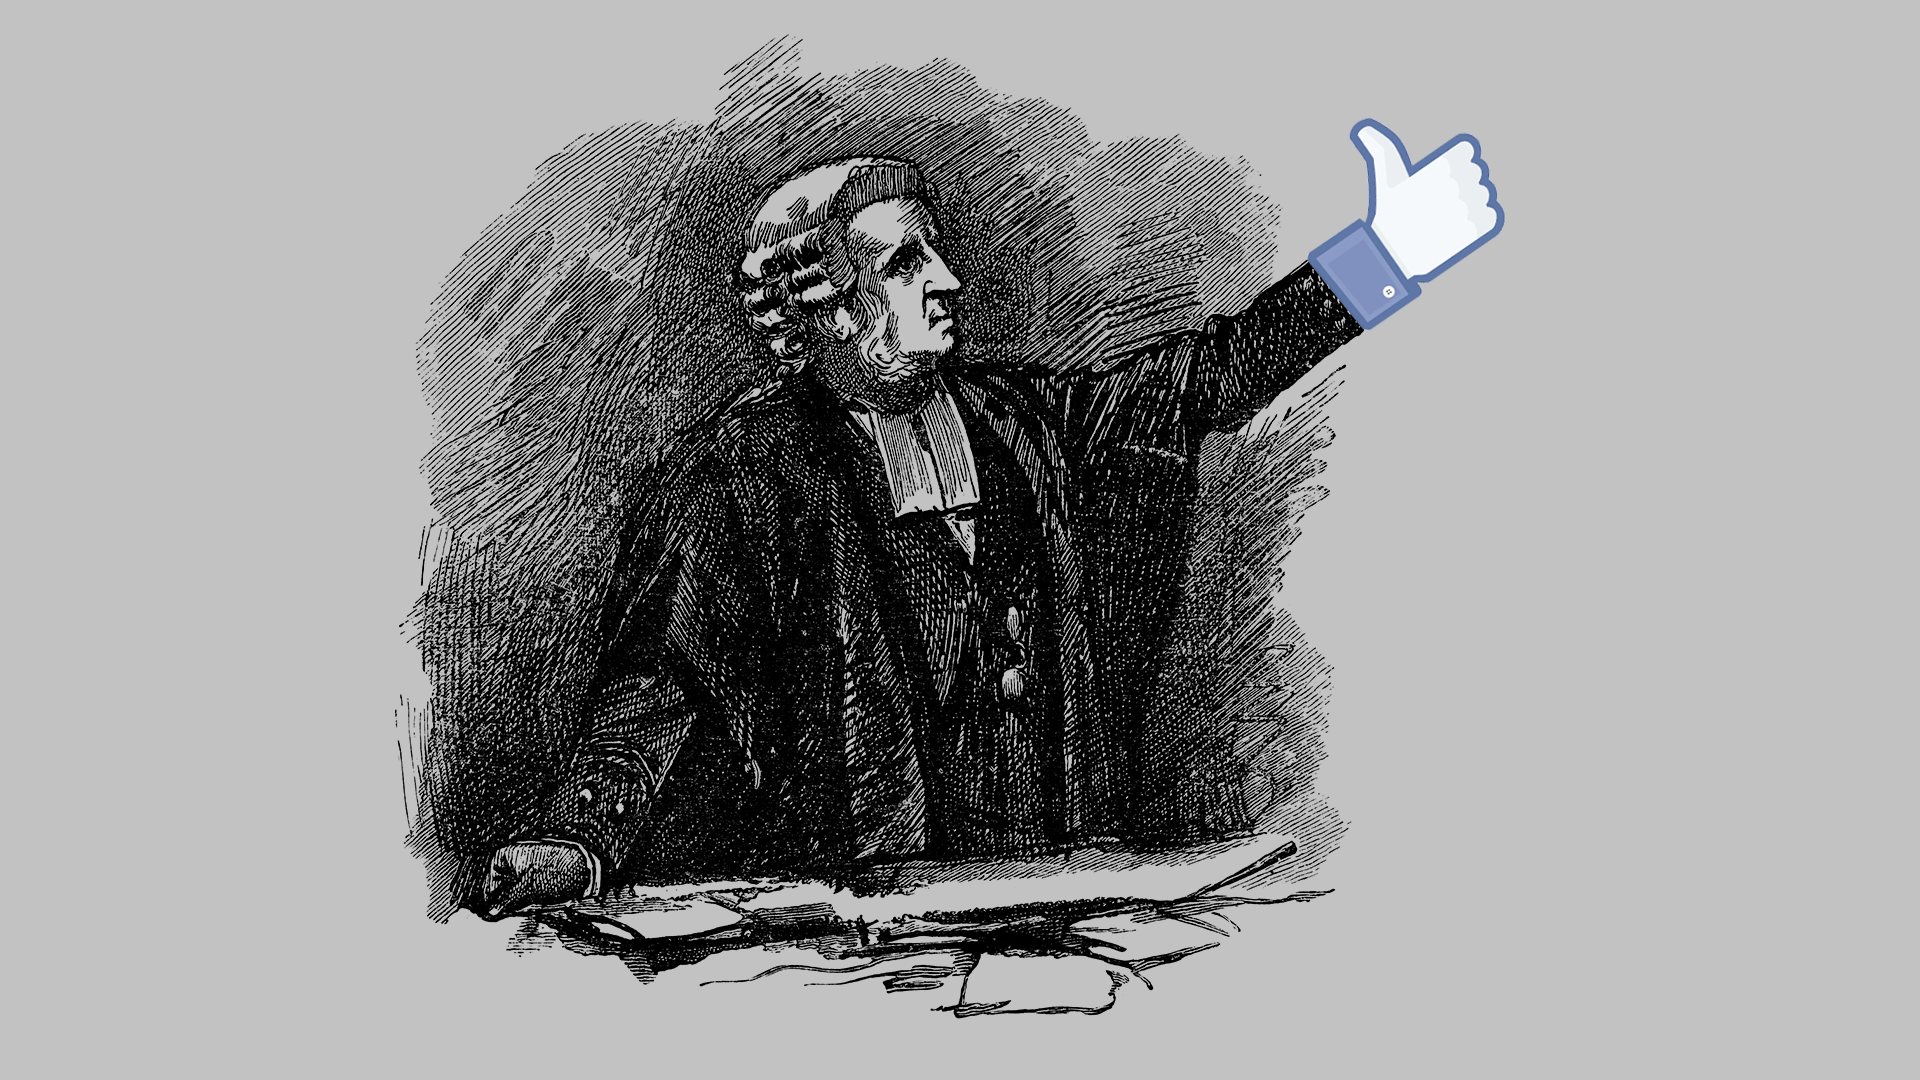 Wood etching of a Founding Father-like figure in wig and robes with a Facebook "like" thumb's up hand